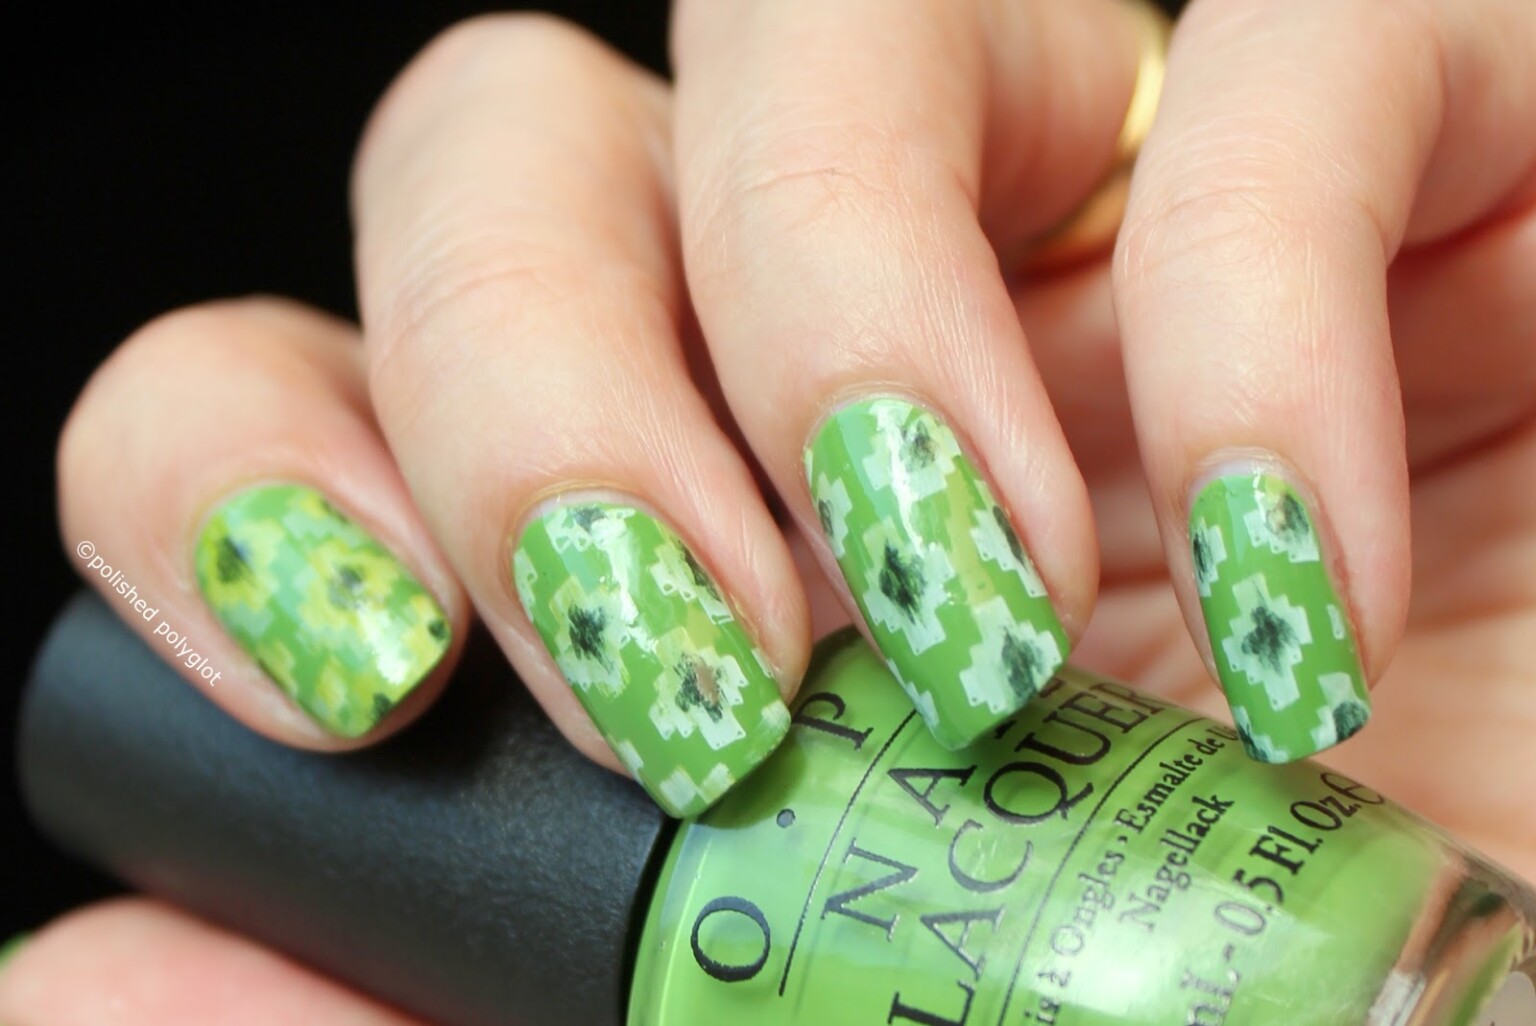 Get Creative with These Green Nail Art Ideas - wide 5